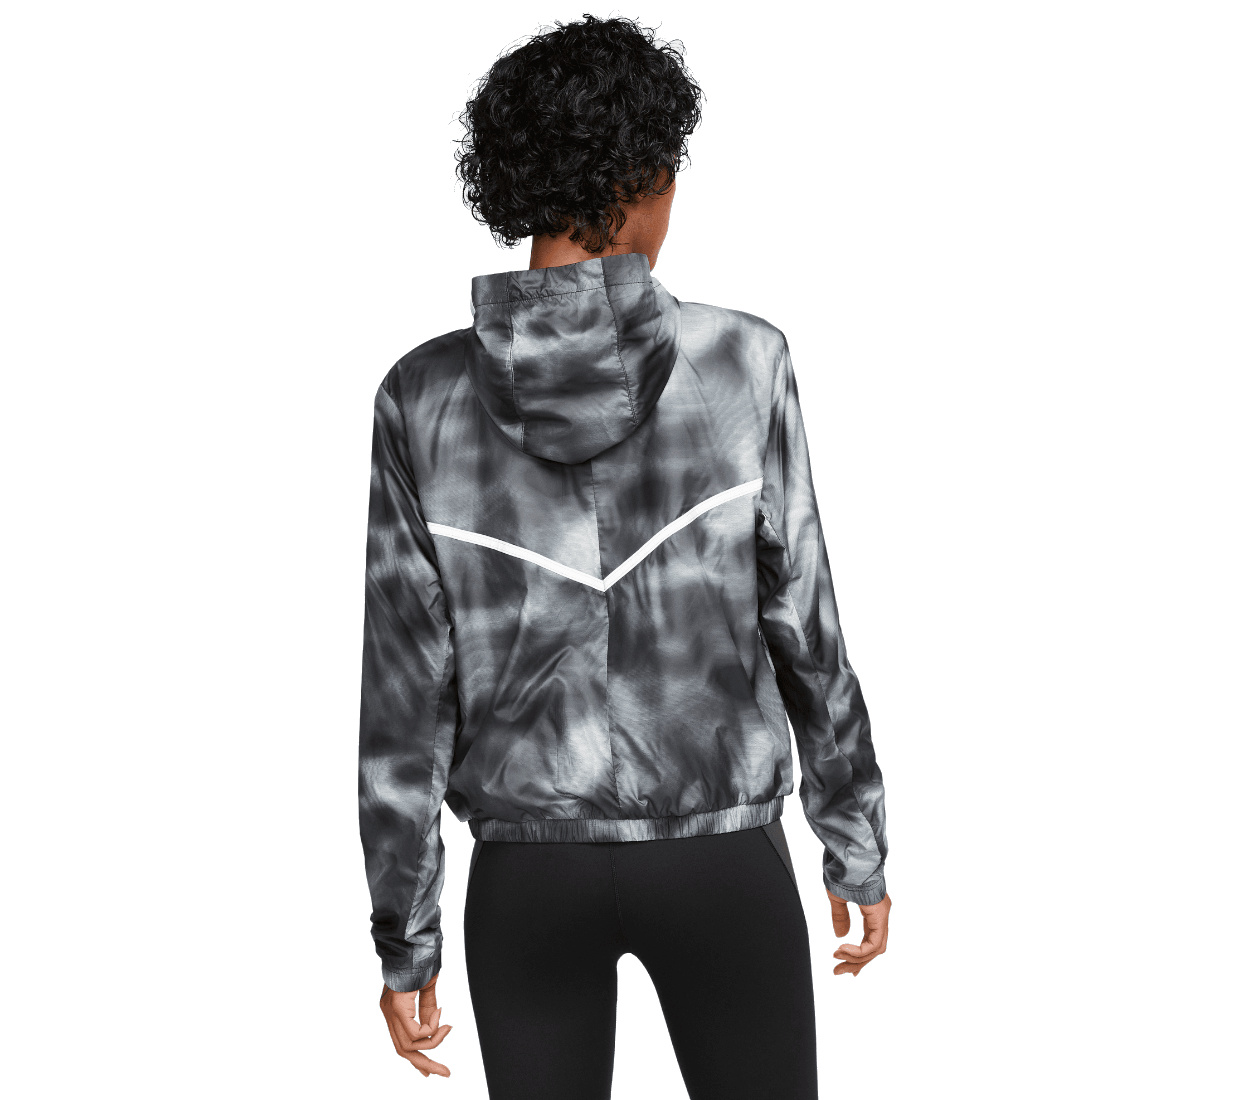 Nike Woven Printed Running Jacket (W) giacca a vento | LBM Sport